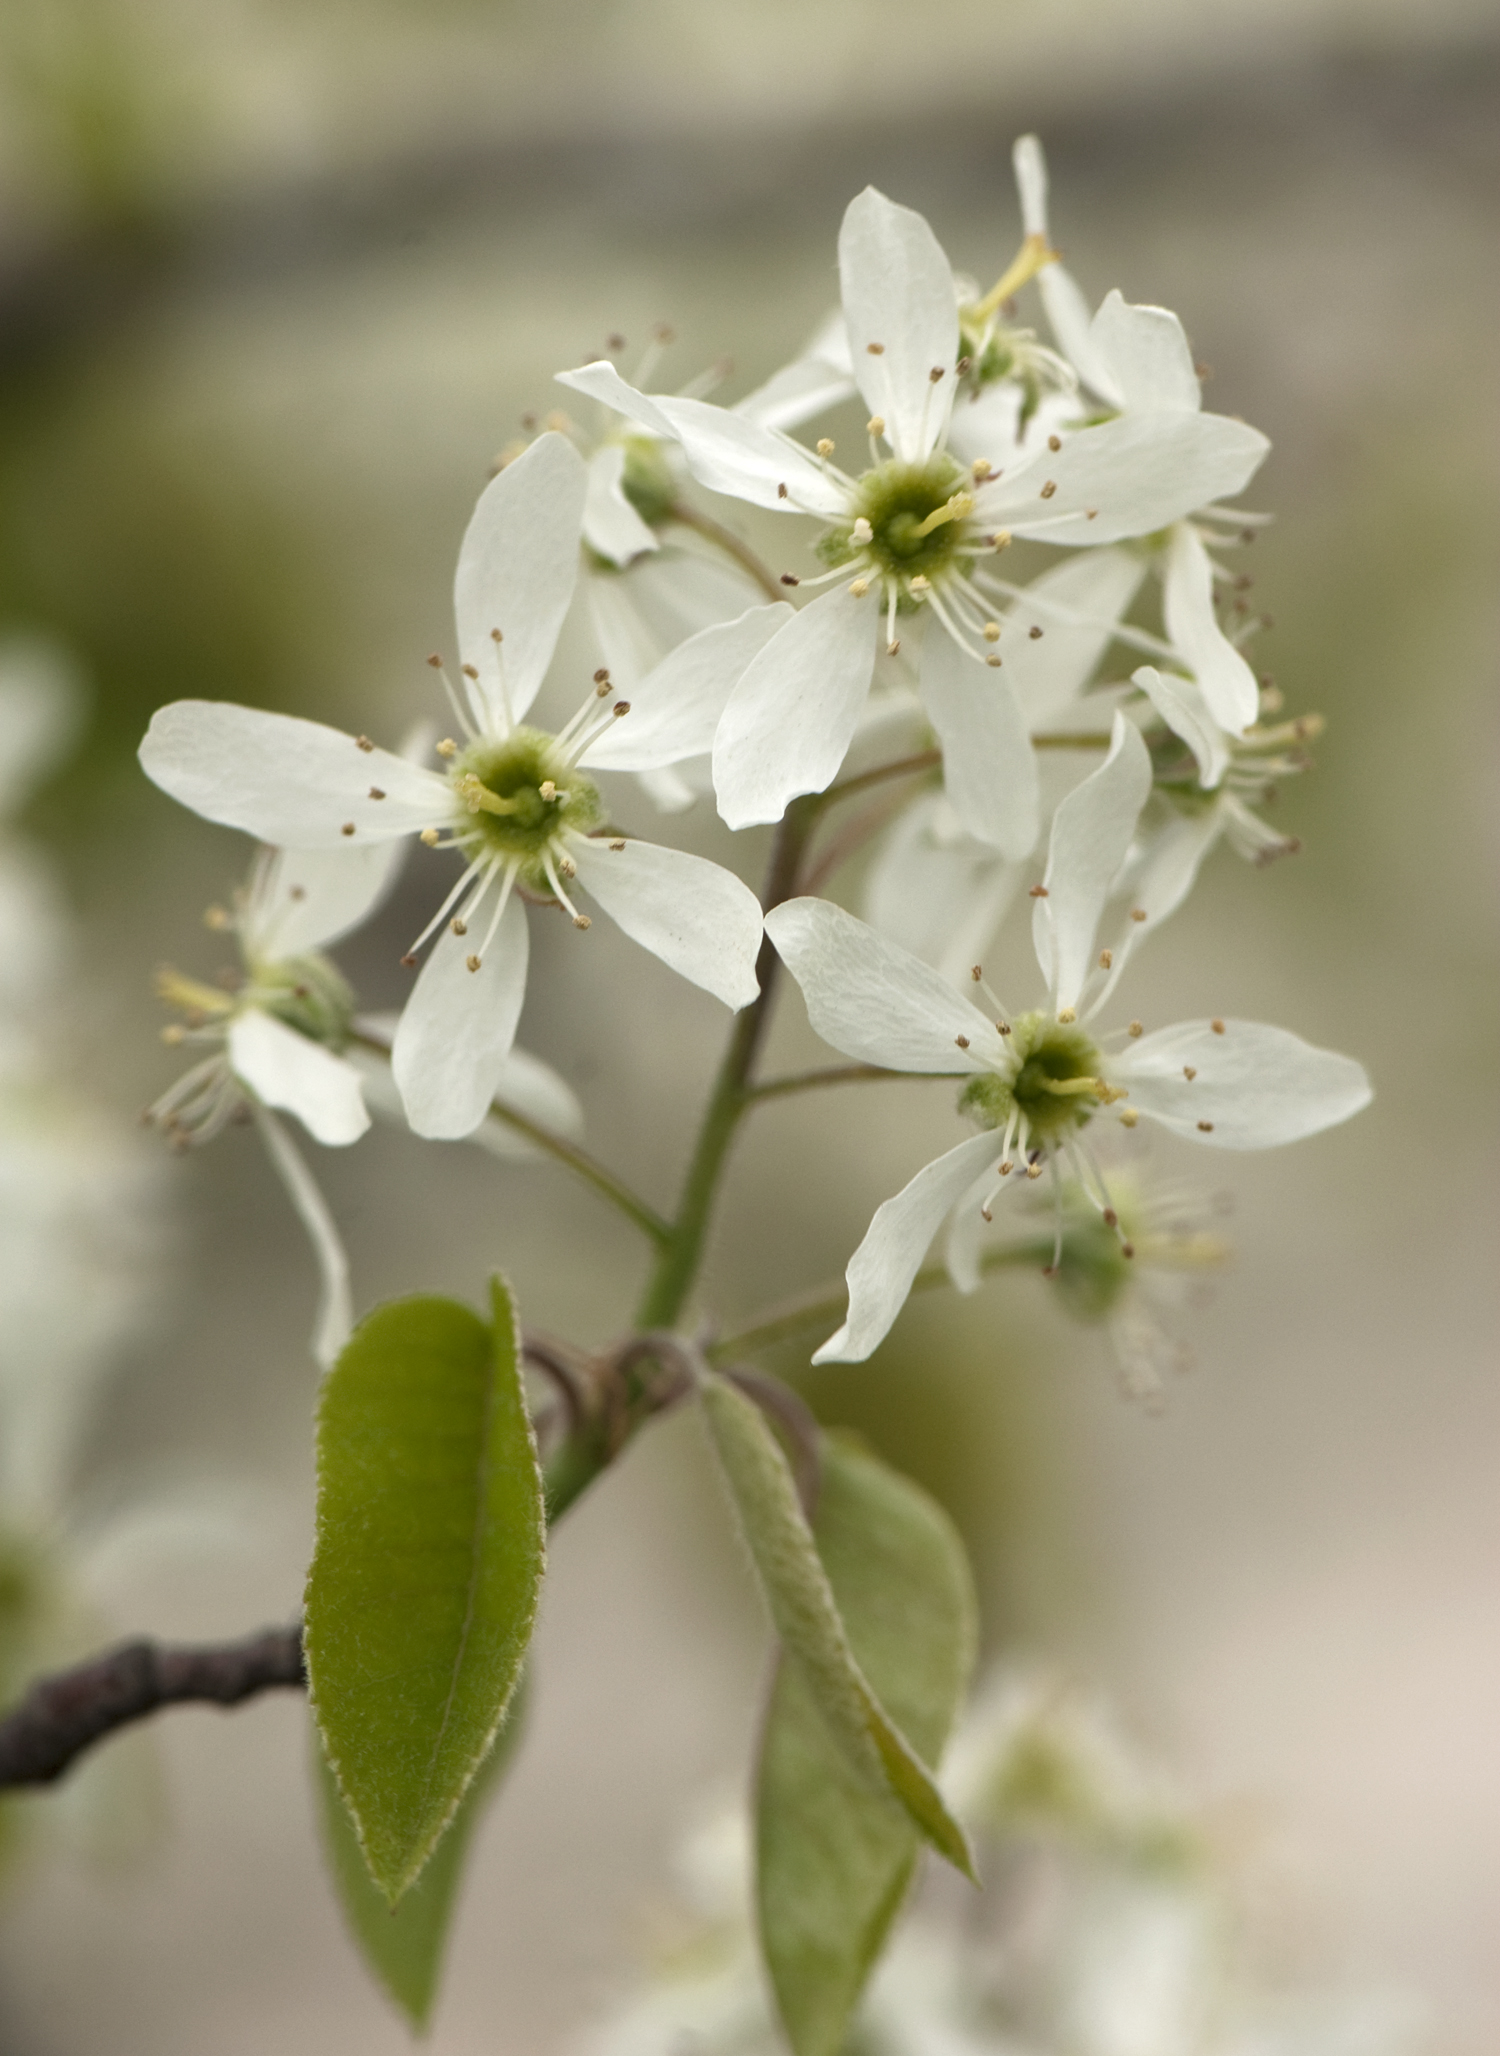 The Garden Detective: What's the White Fluff on My Serviceberry Tree?